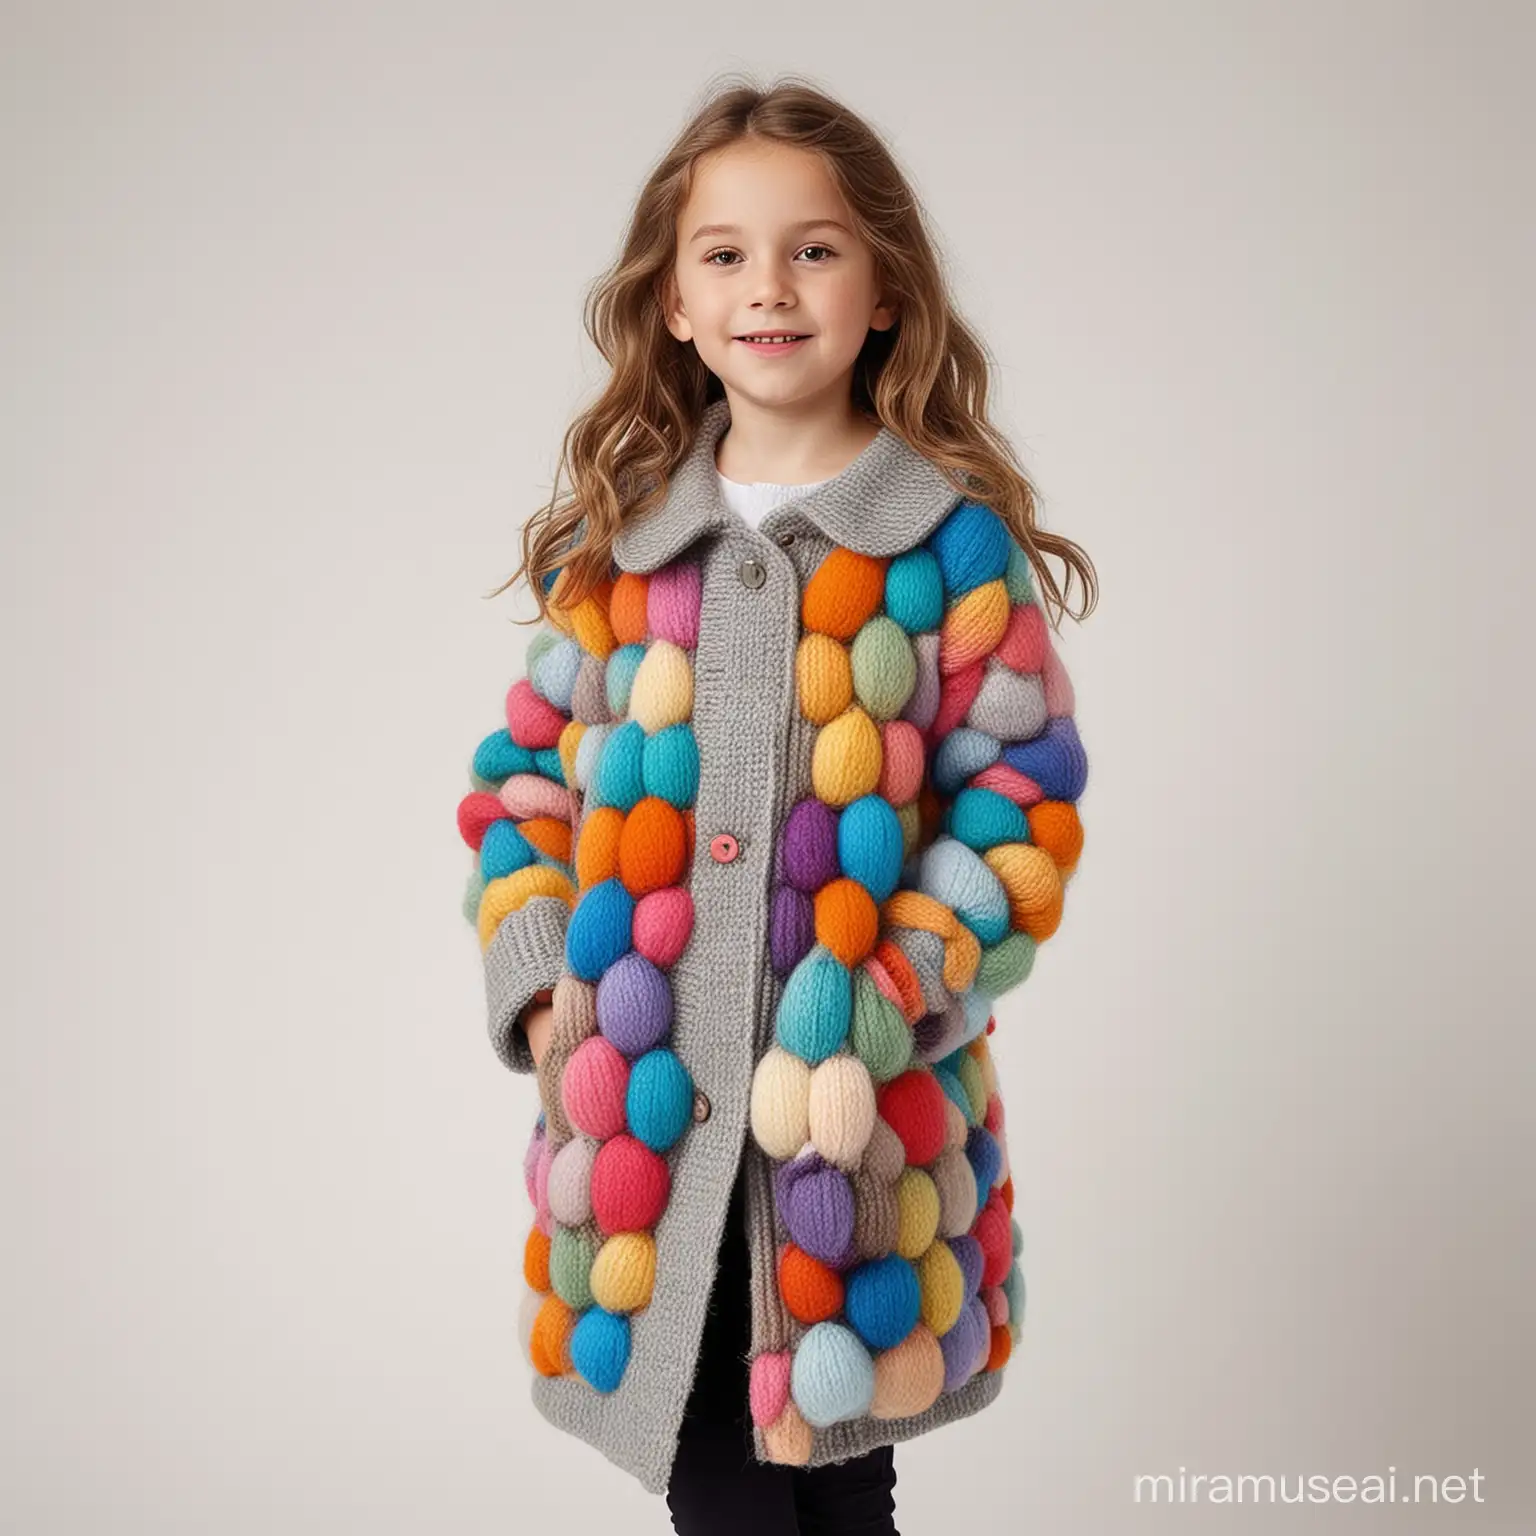 create a realistic, fashionable 10-year-old wearing a pretty coat made from big realistic brightly-colored woollen Easter eggs, white background, 